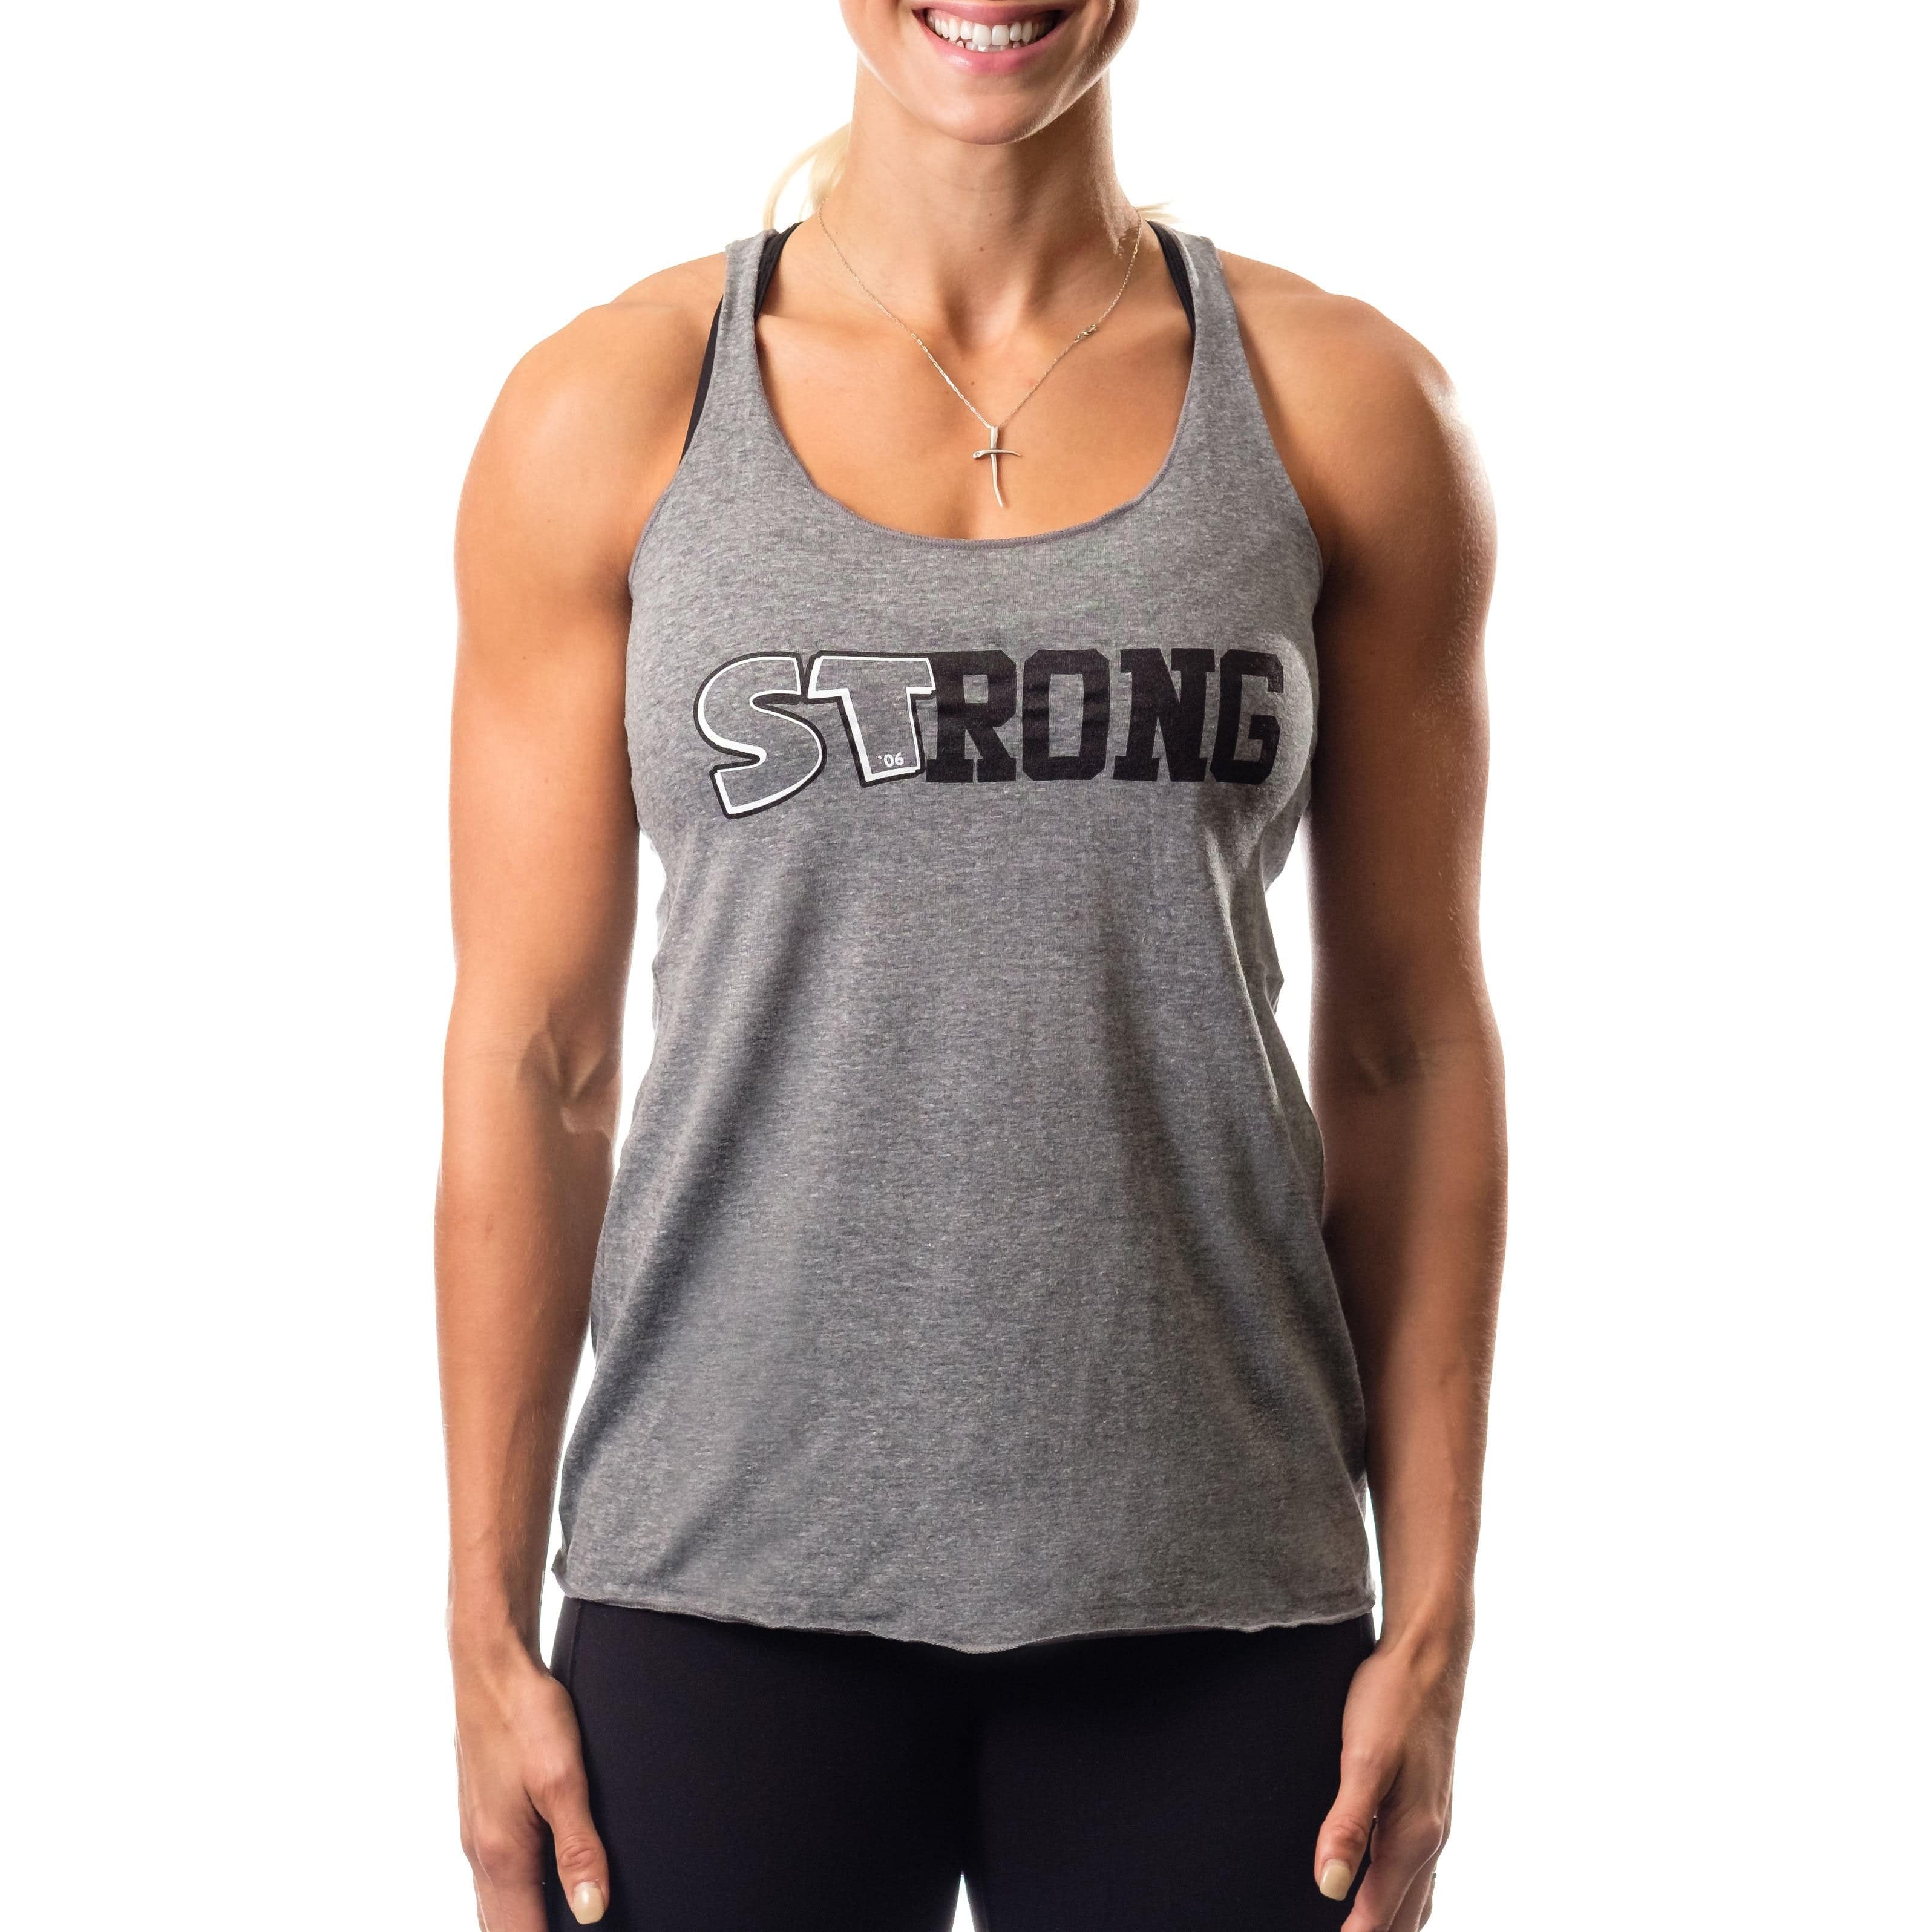 Sling Shot | Women's STrong Tank - Grey - XTC Fitness - Exercise Equipment Superstore - Canada - Tanks